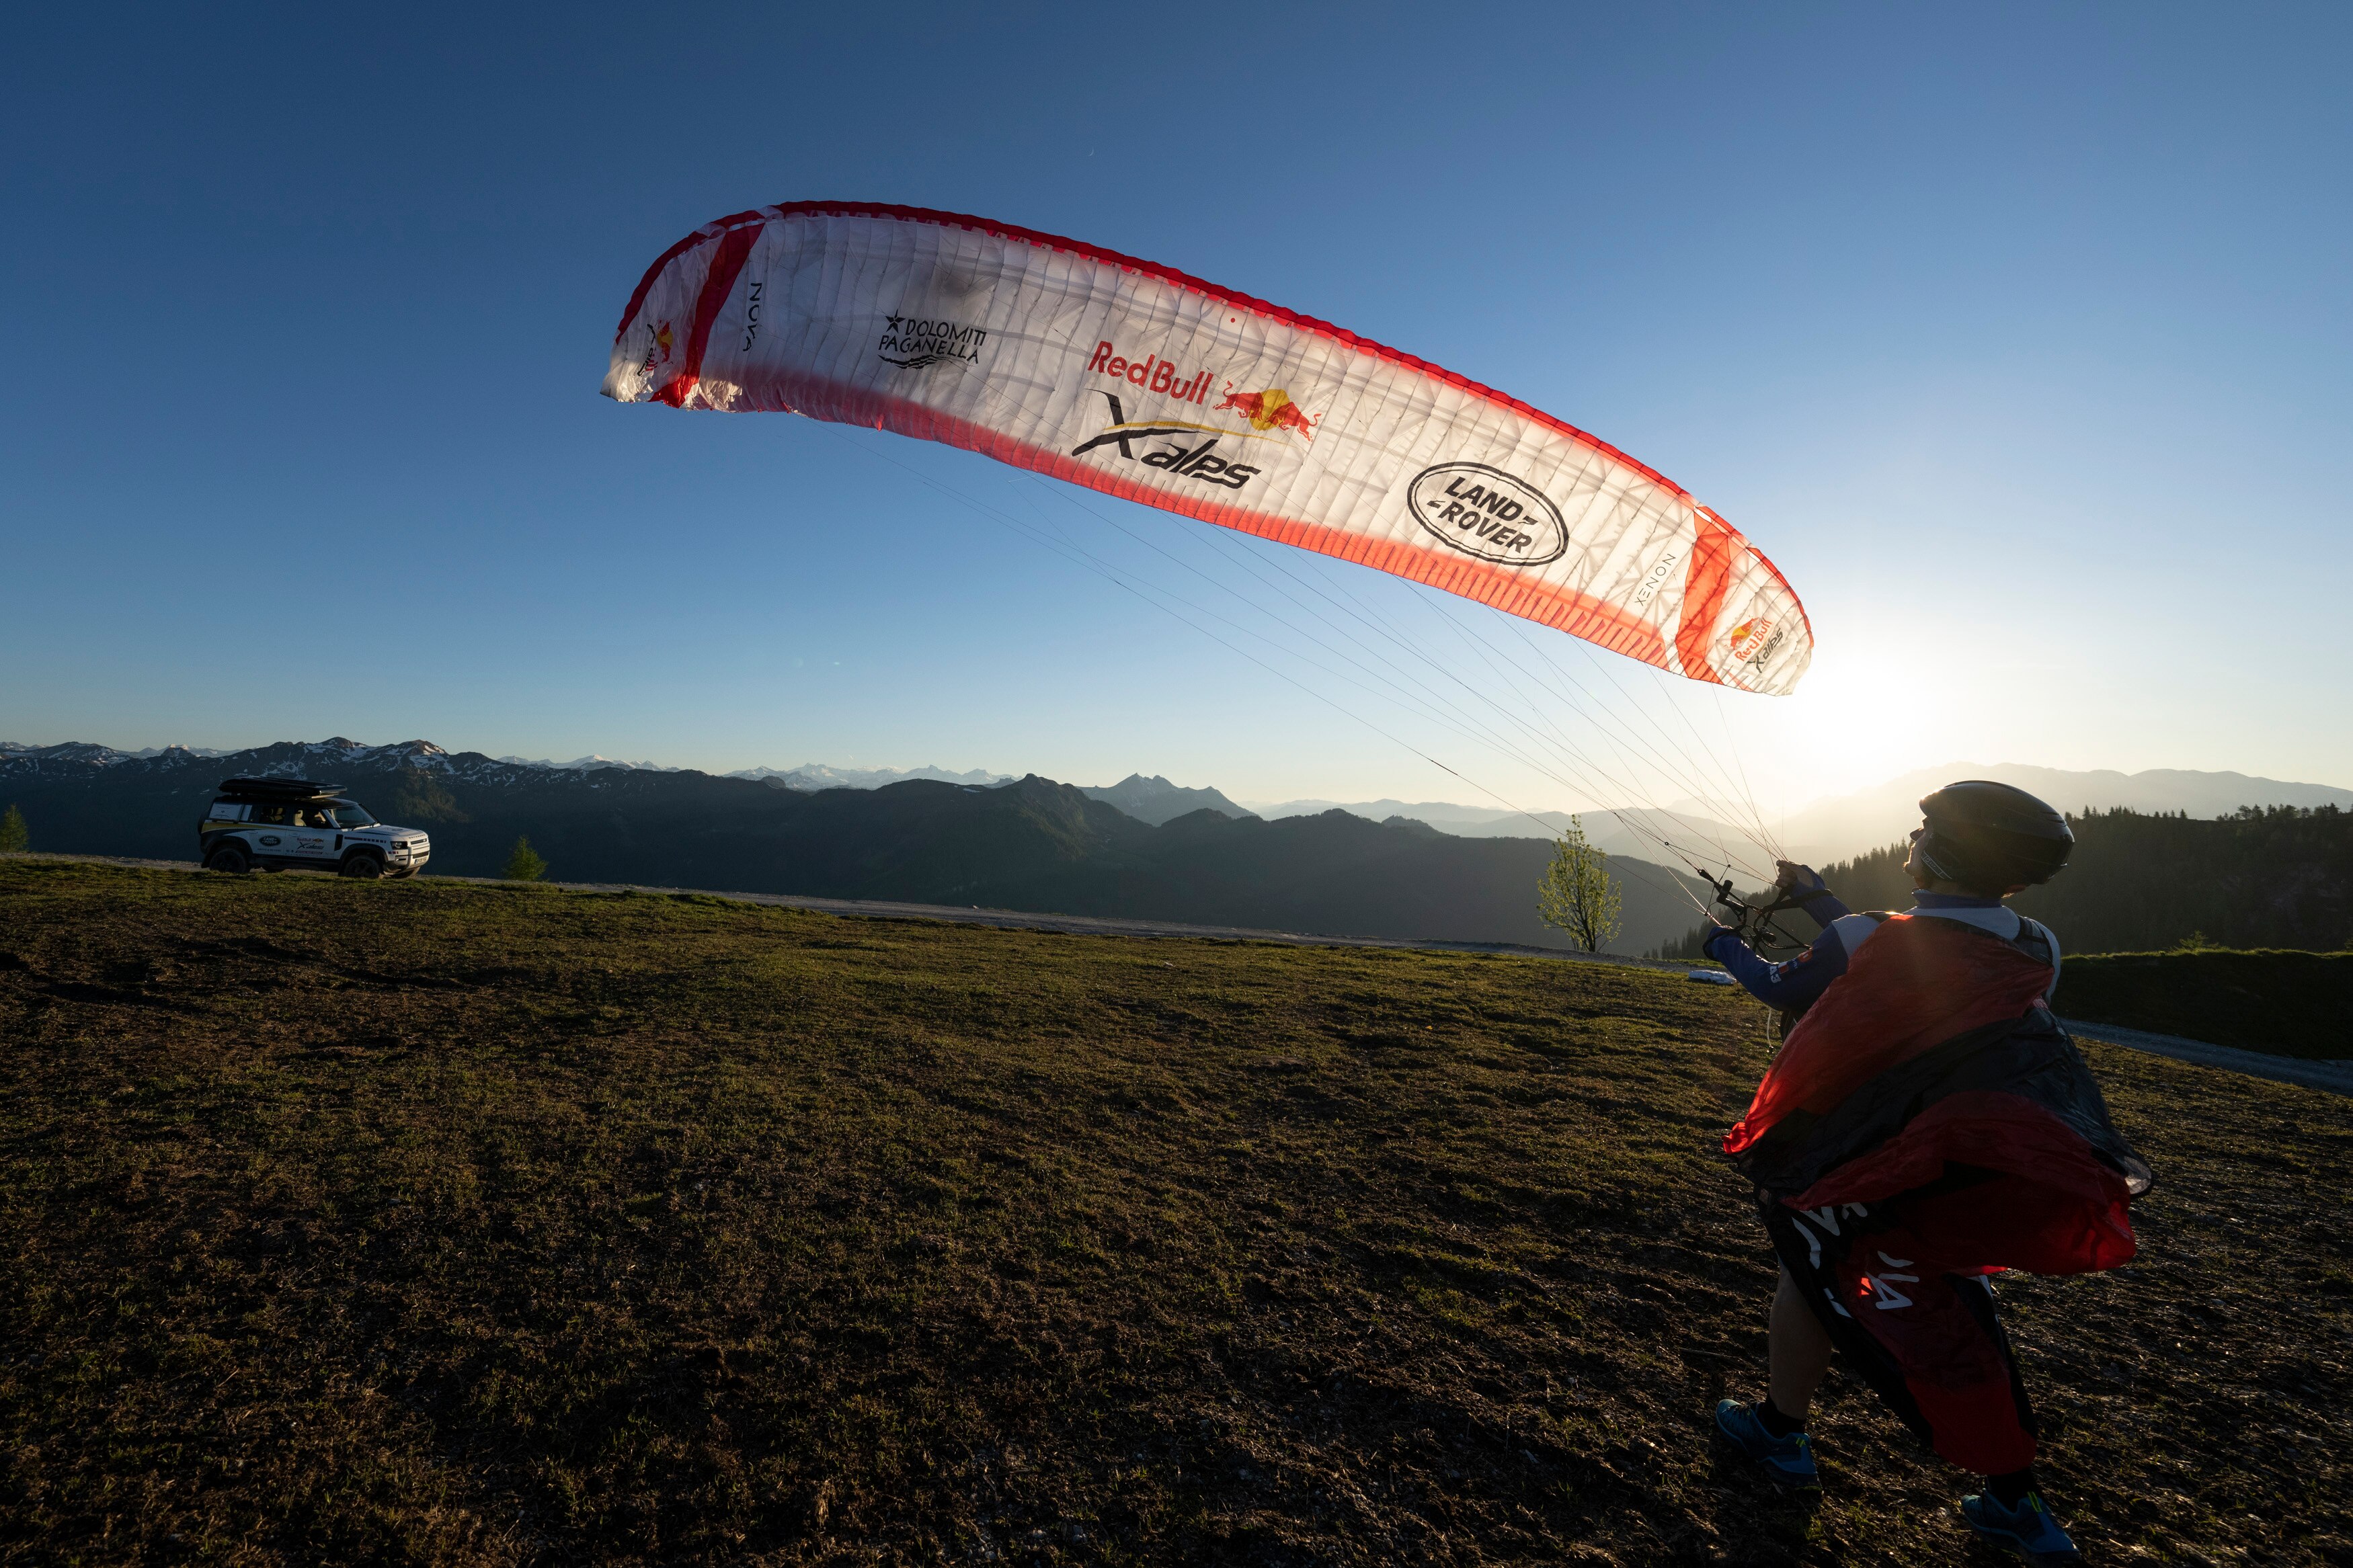 ITA3 performs during the Red Bull X-Alps pre-shooting in Kleinarl, Austria on June 14, 2021.